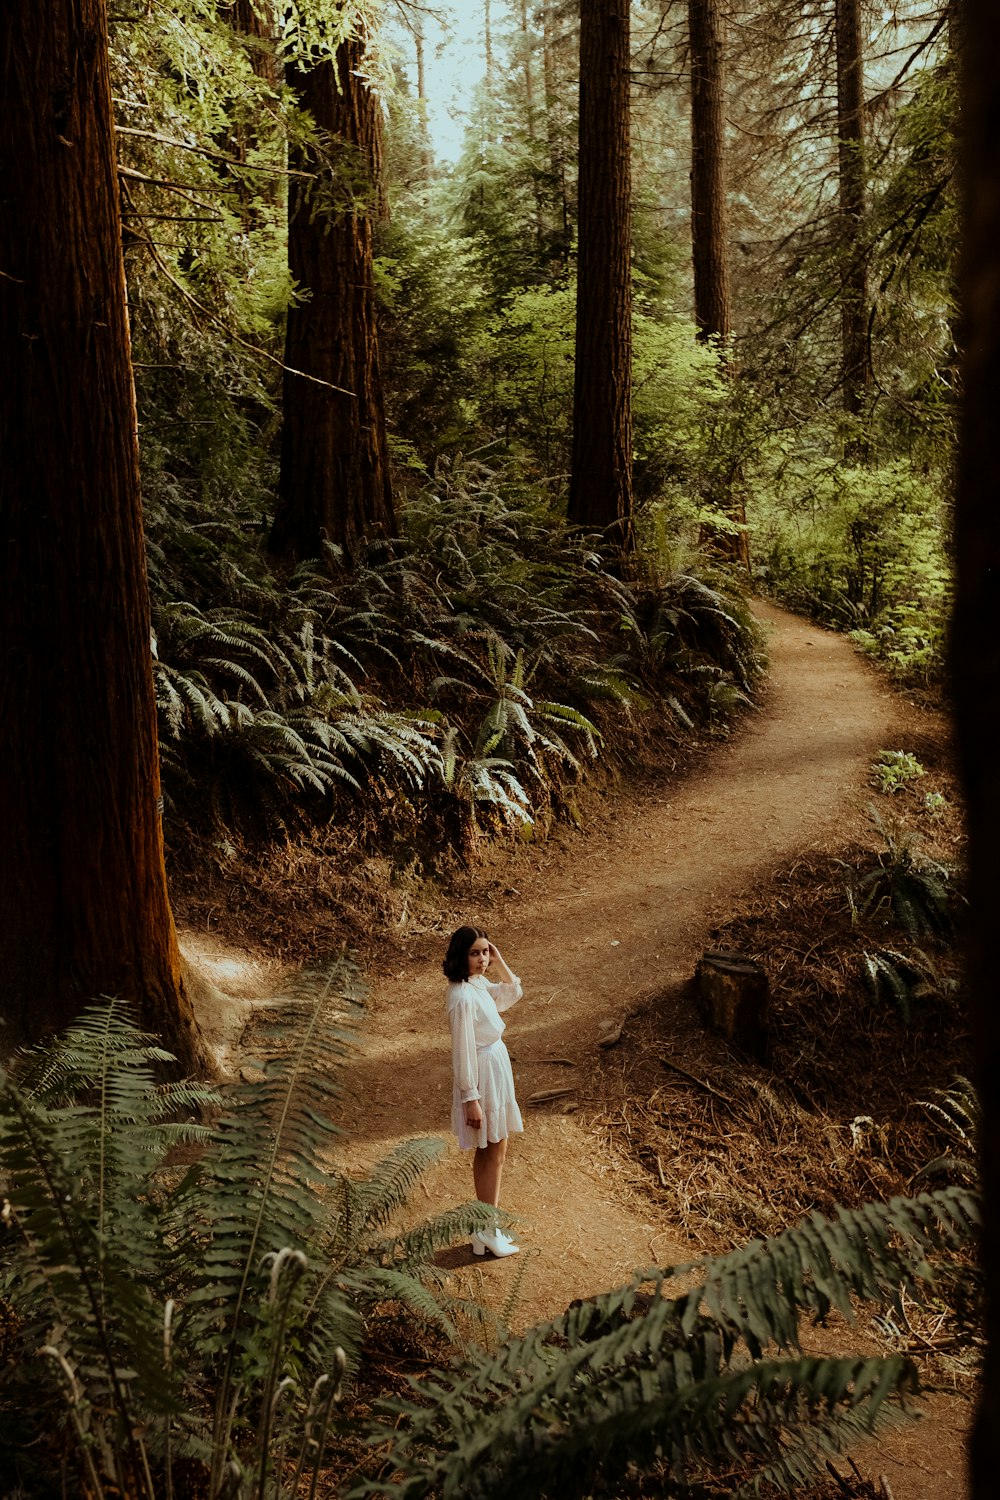 girl in white shirt walking on dirt road between green plants and trees during daytime